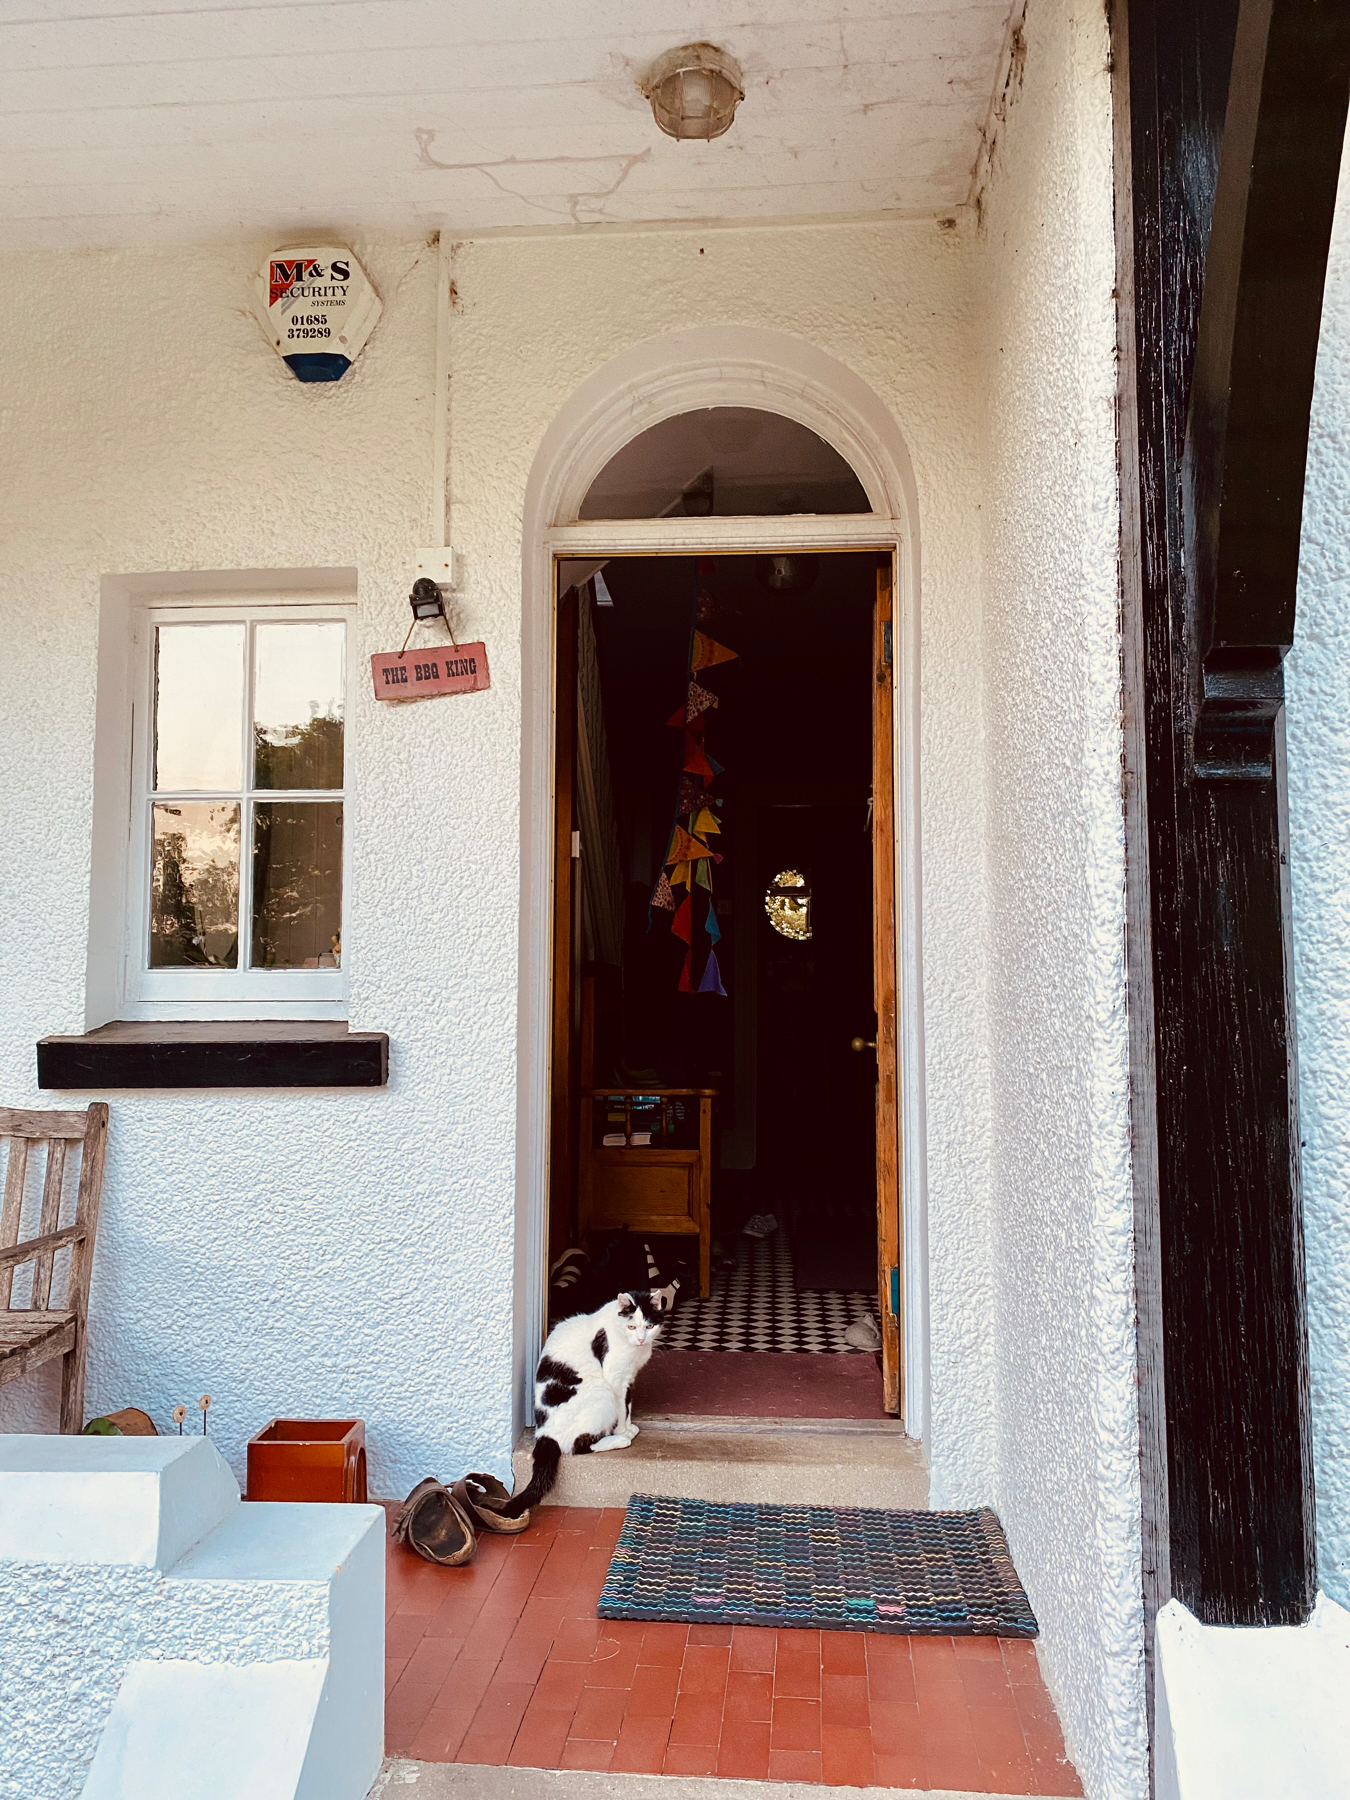 Black and white cat sitting in doorway of house